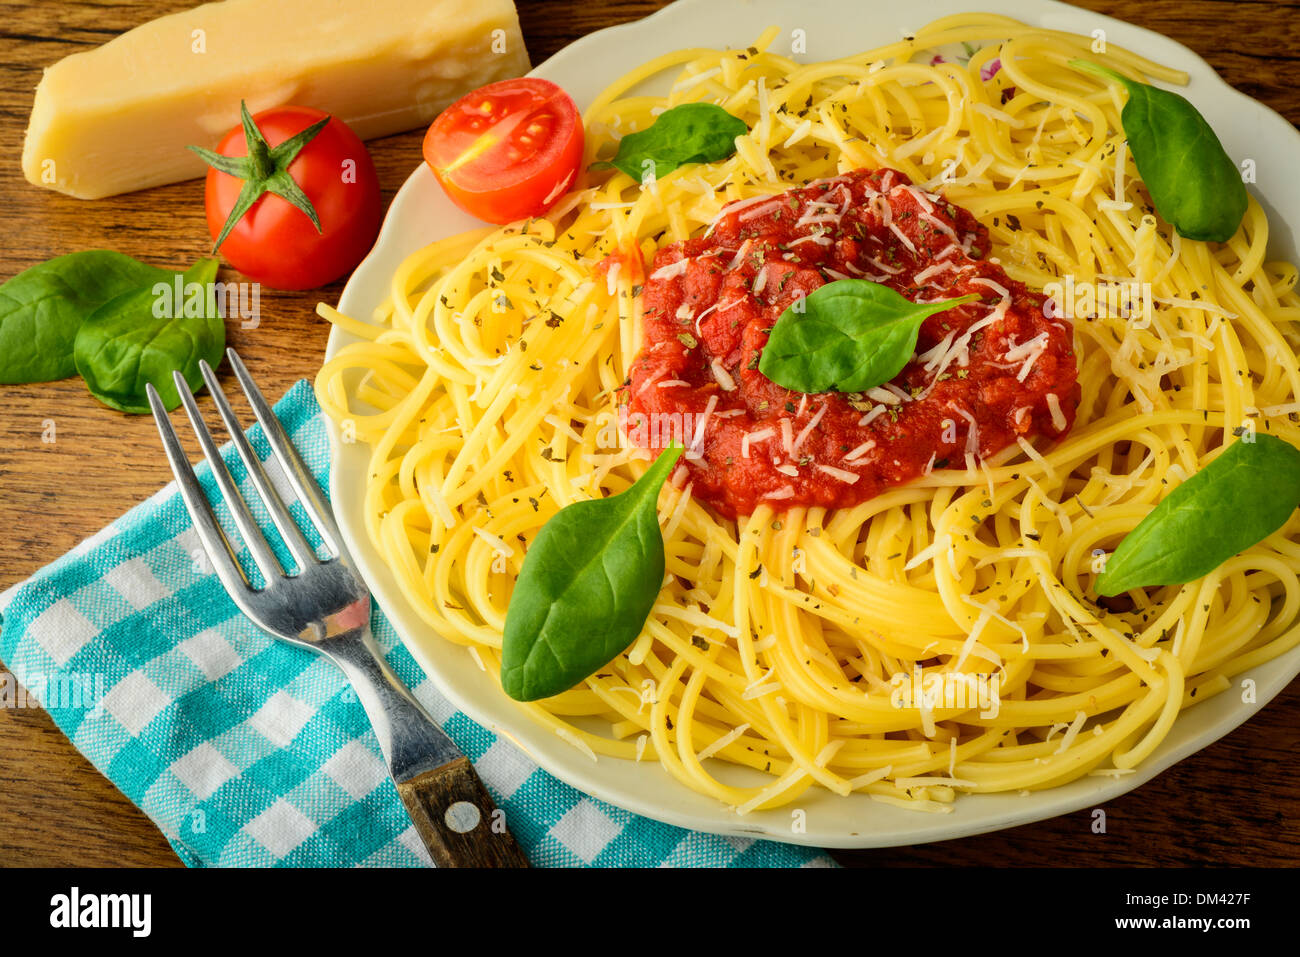 traditional spaghetti pasta meal with tomato sauche and basil Stock Photo